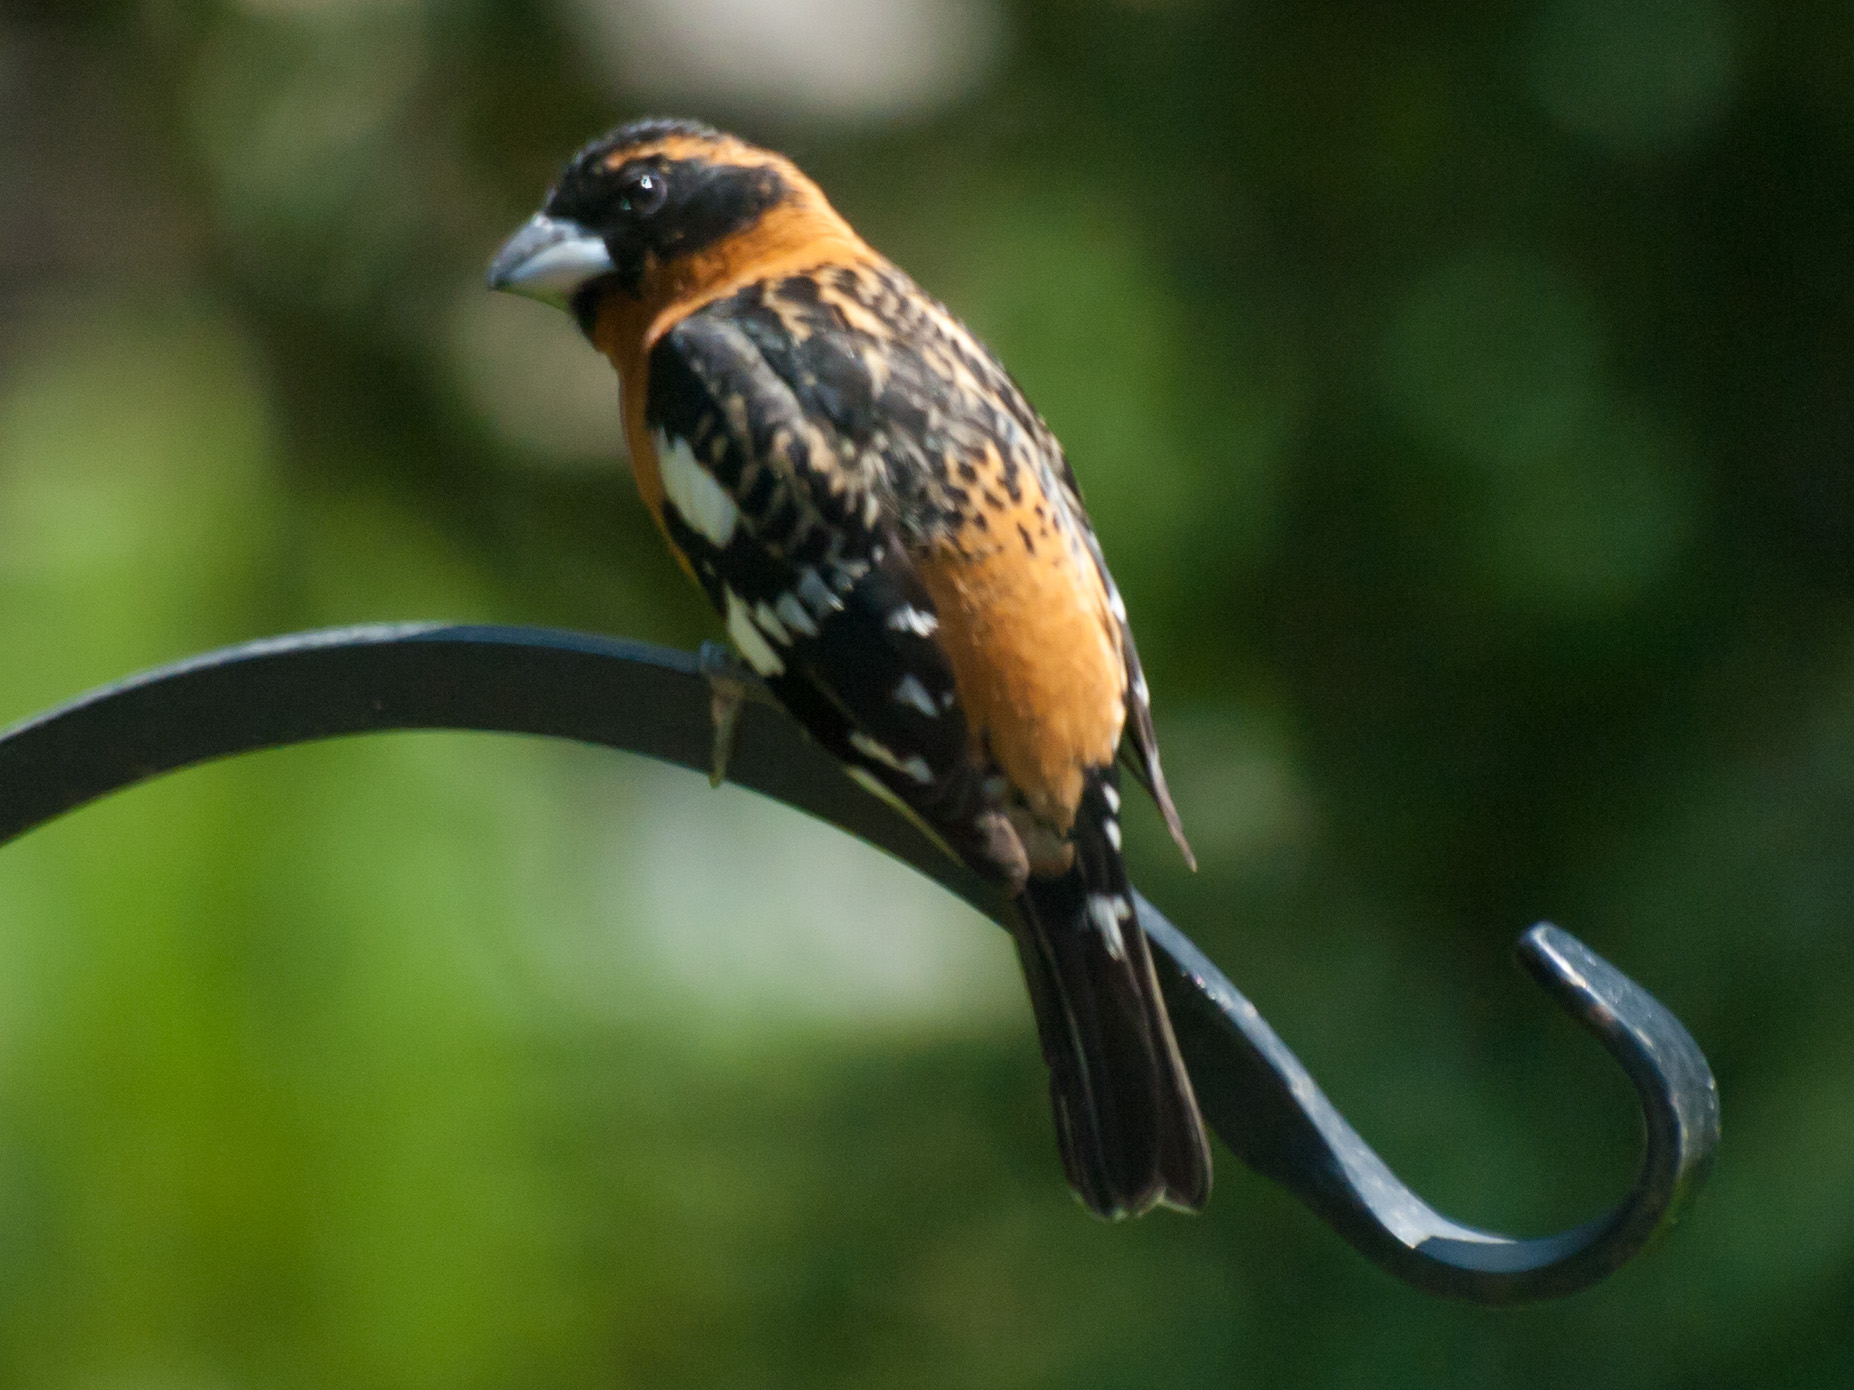 a bird with a stripe on his body and wings